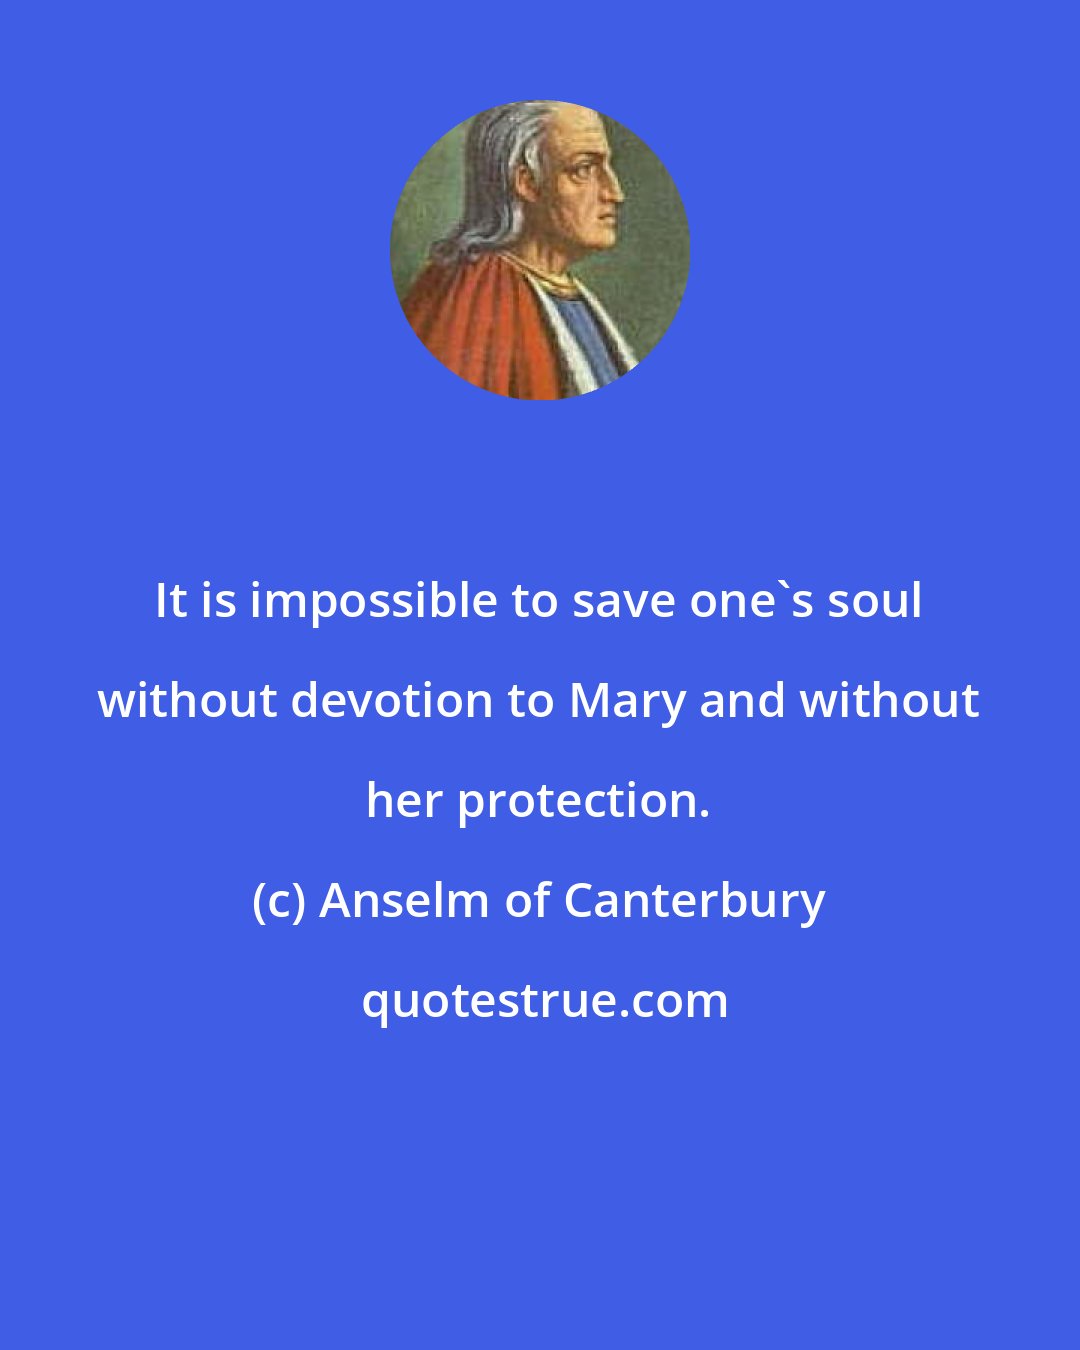 Anselm of Canterbury: It is impossible to save one's soul without devotion to Mary and without her protection.